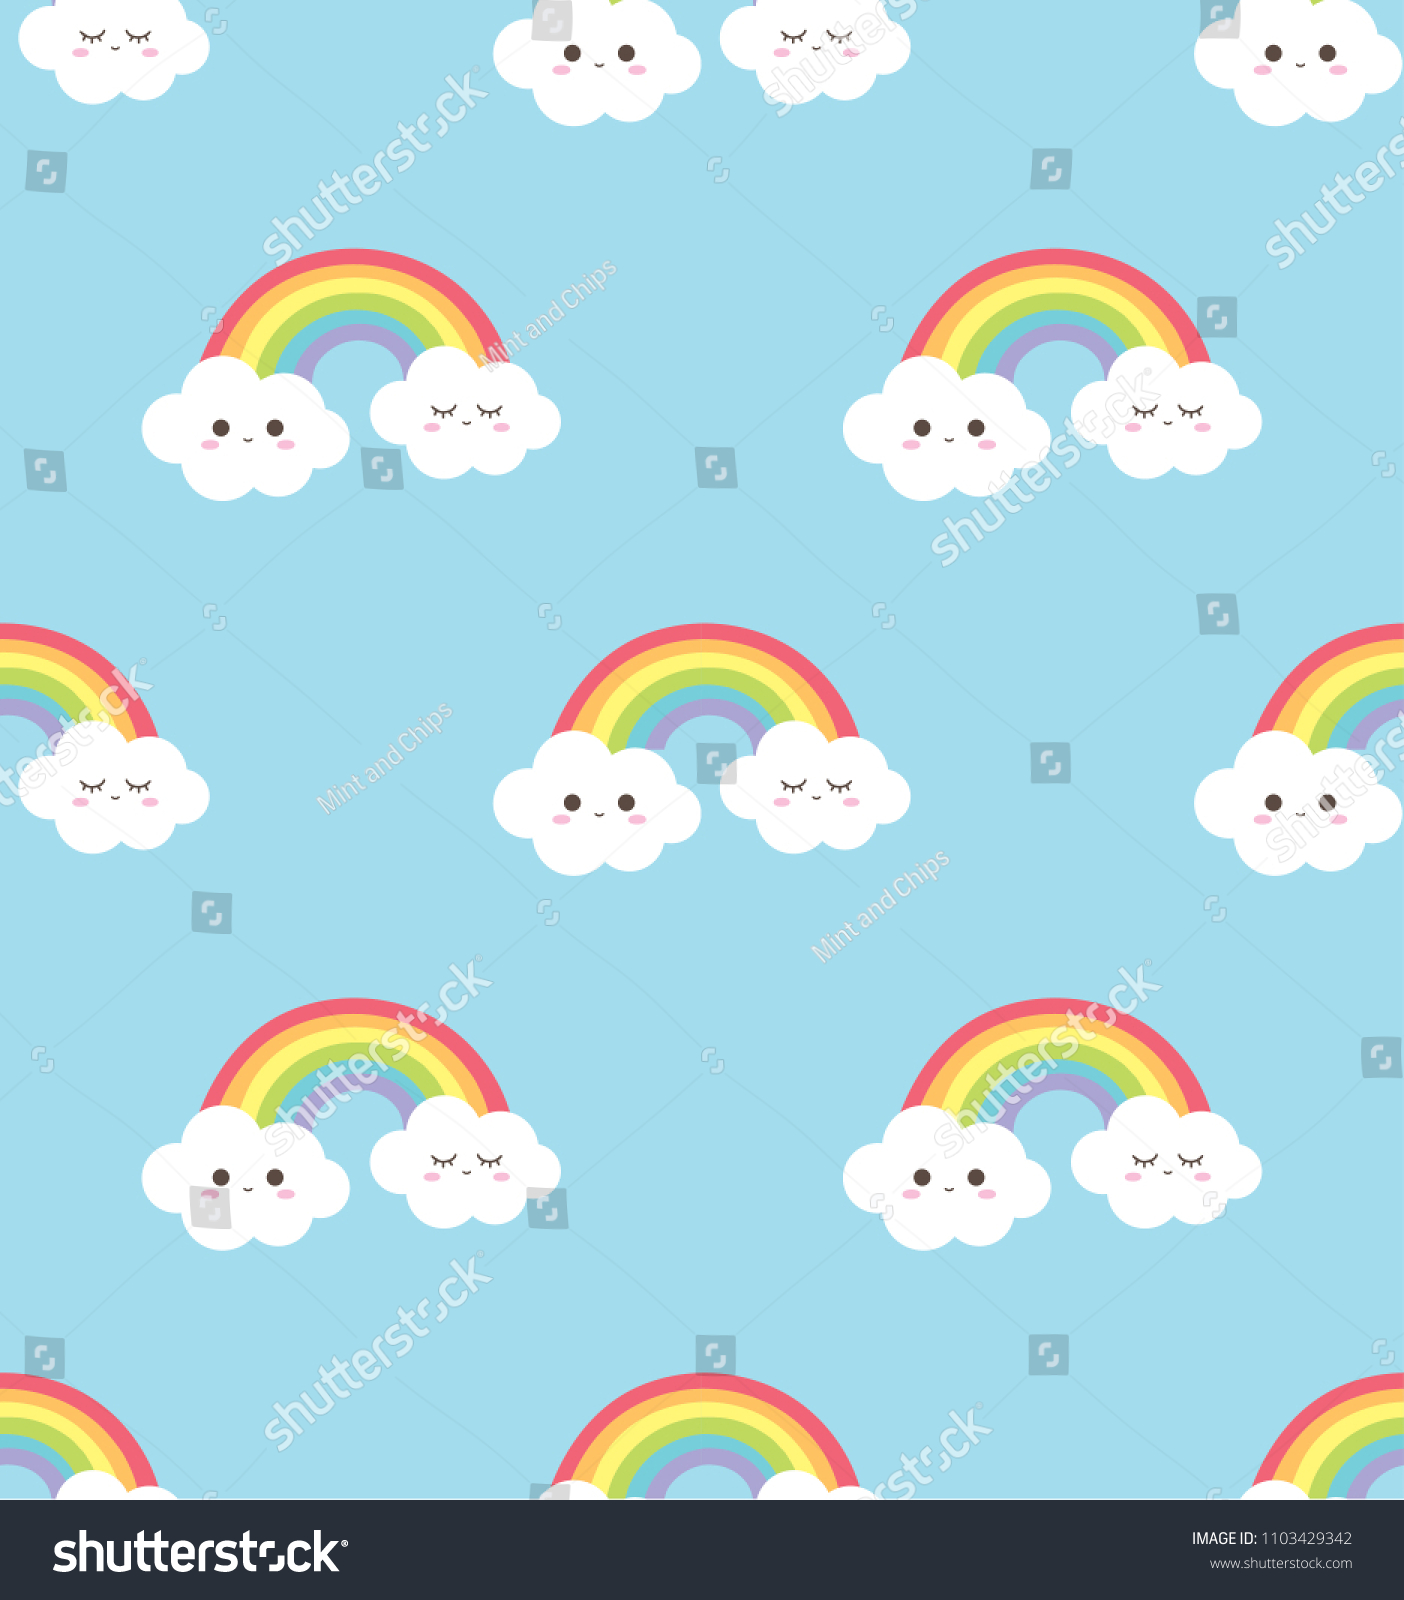 Cute Rainbow Clouds Smile Face Seamless Stock Vector (Royalty Free ...